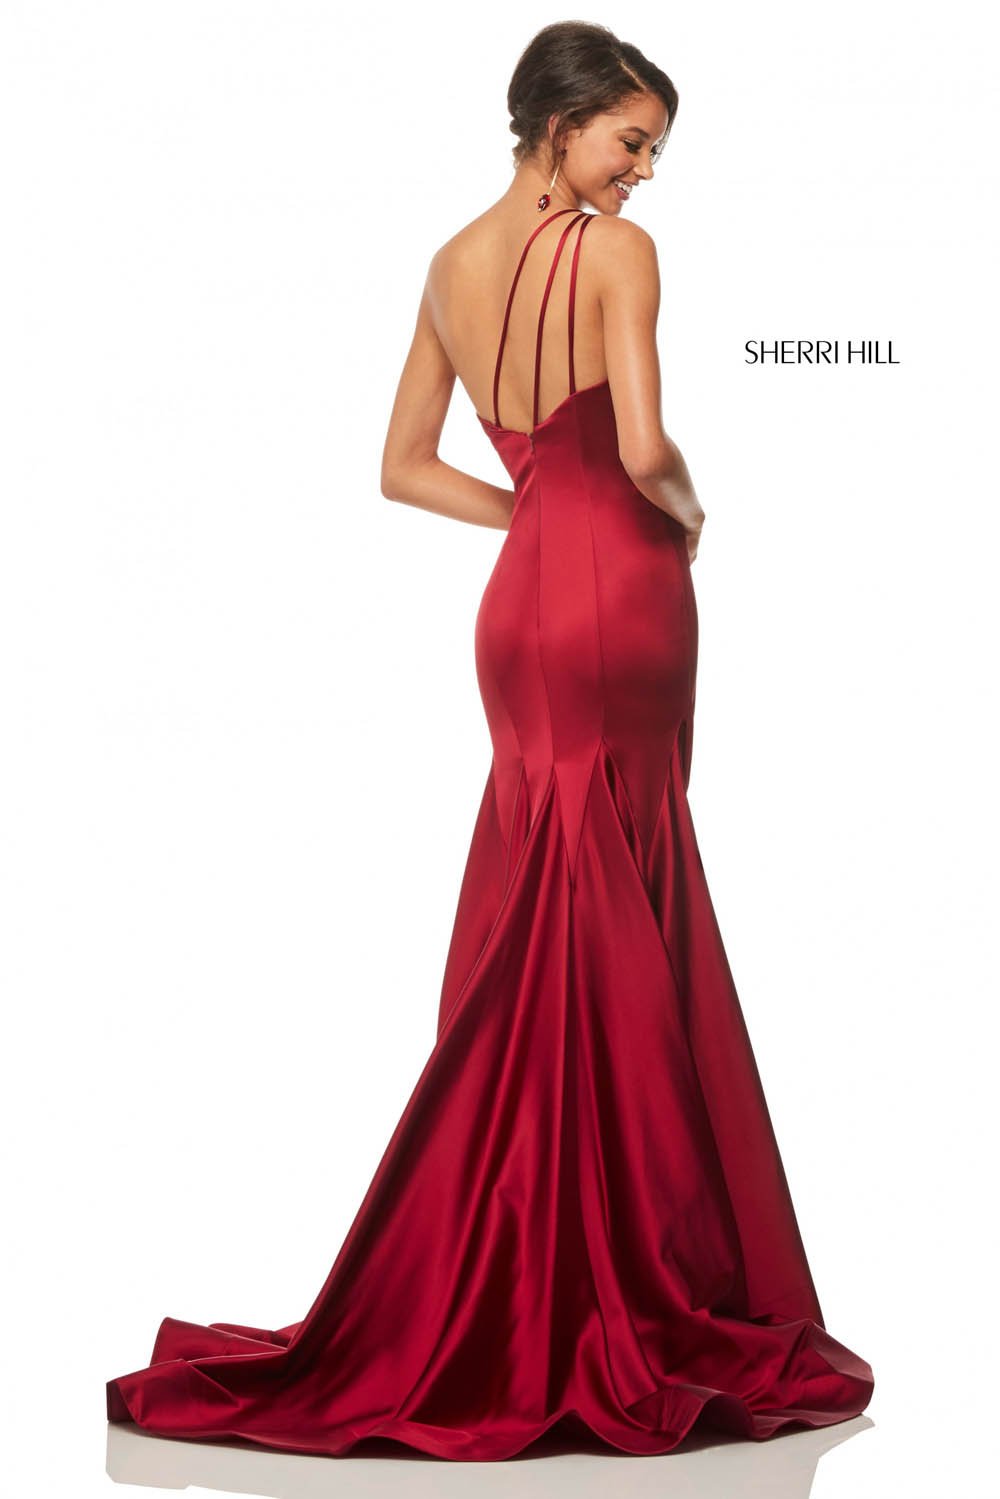 Sherri Hill 52886 dress images in these colors: Black, Royal, Emerald, Red, Wine.